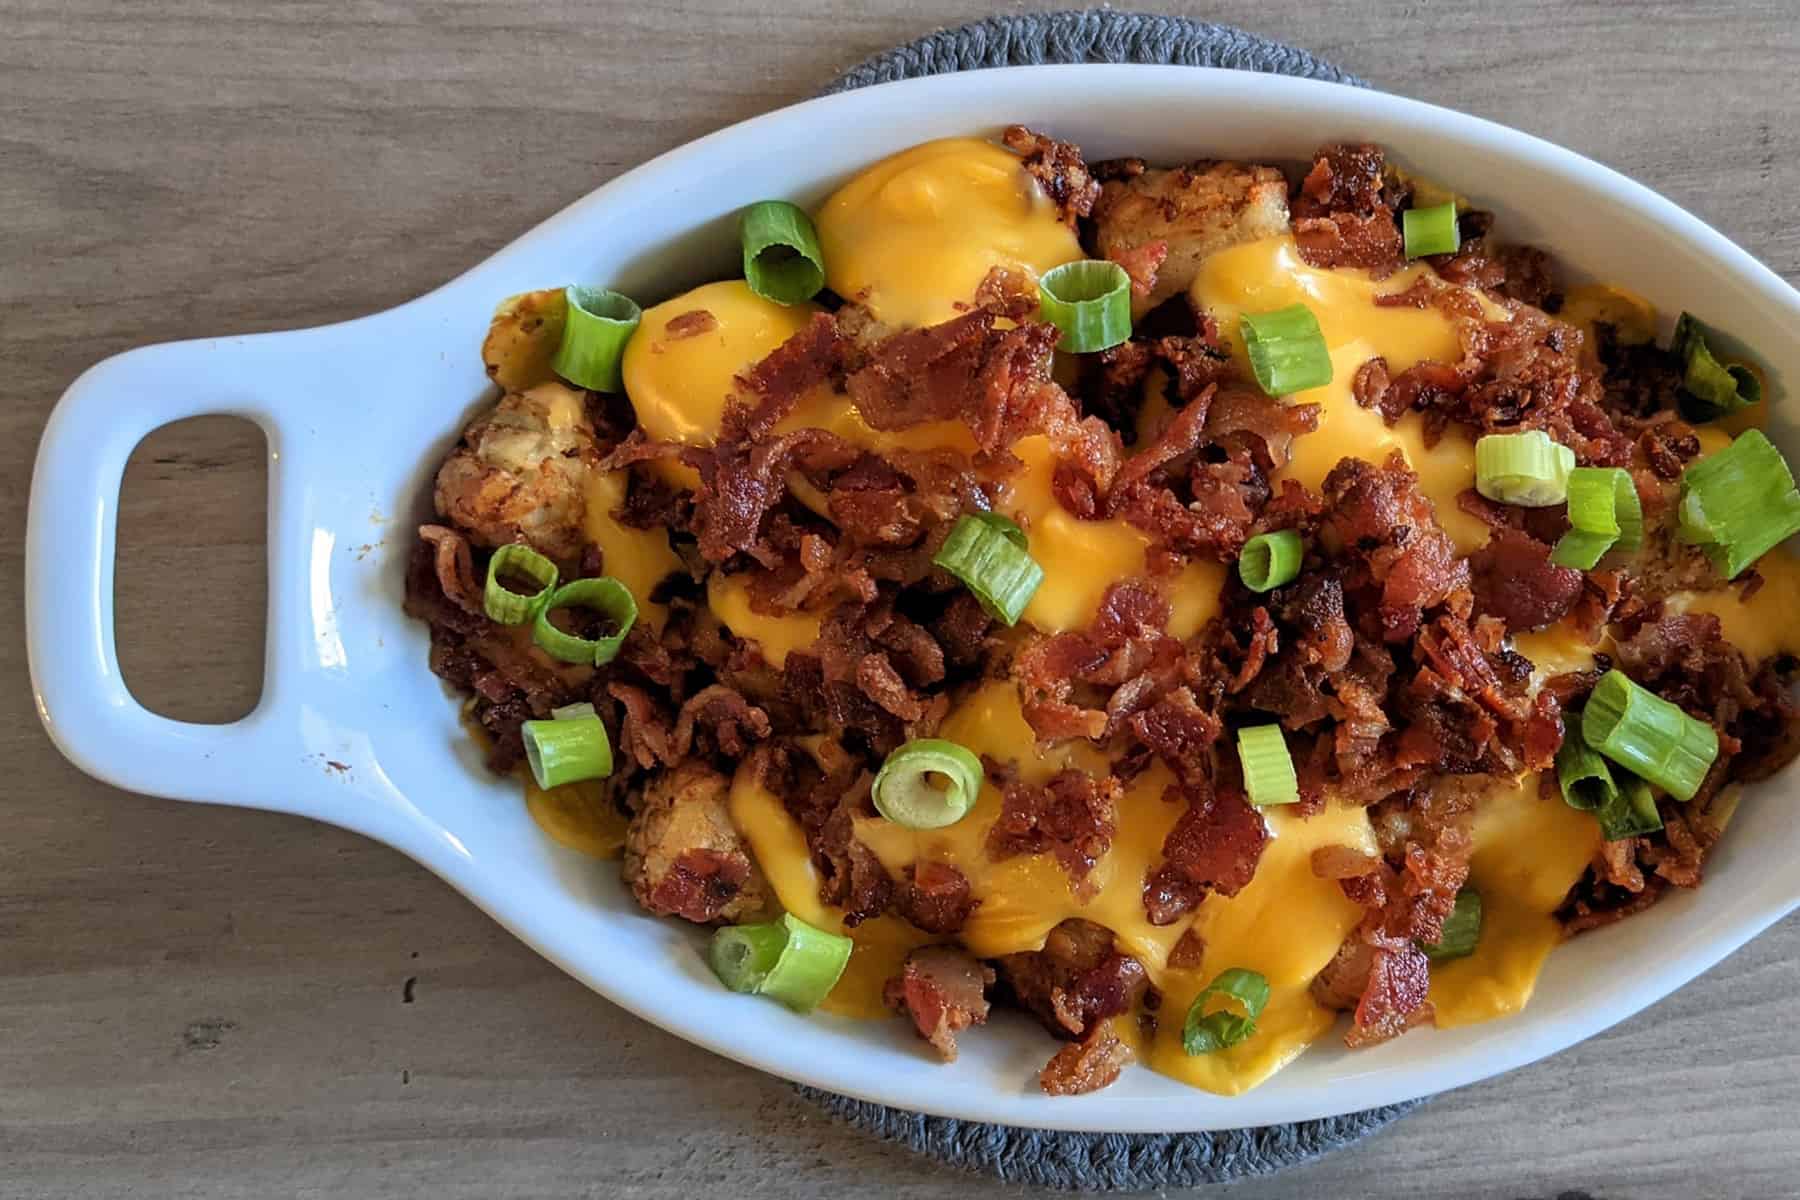 Loaded tater tots with melted Velveeta cheese, crispy crumbled bacon, and scallions in a serving dish